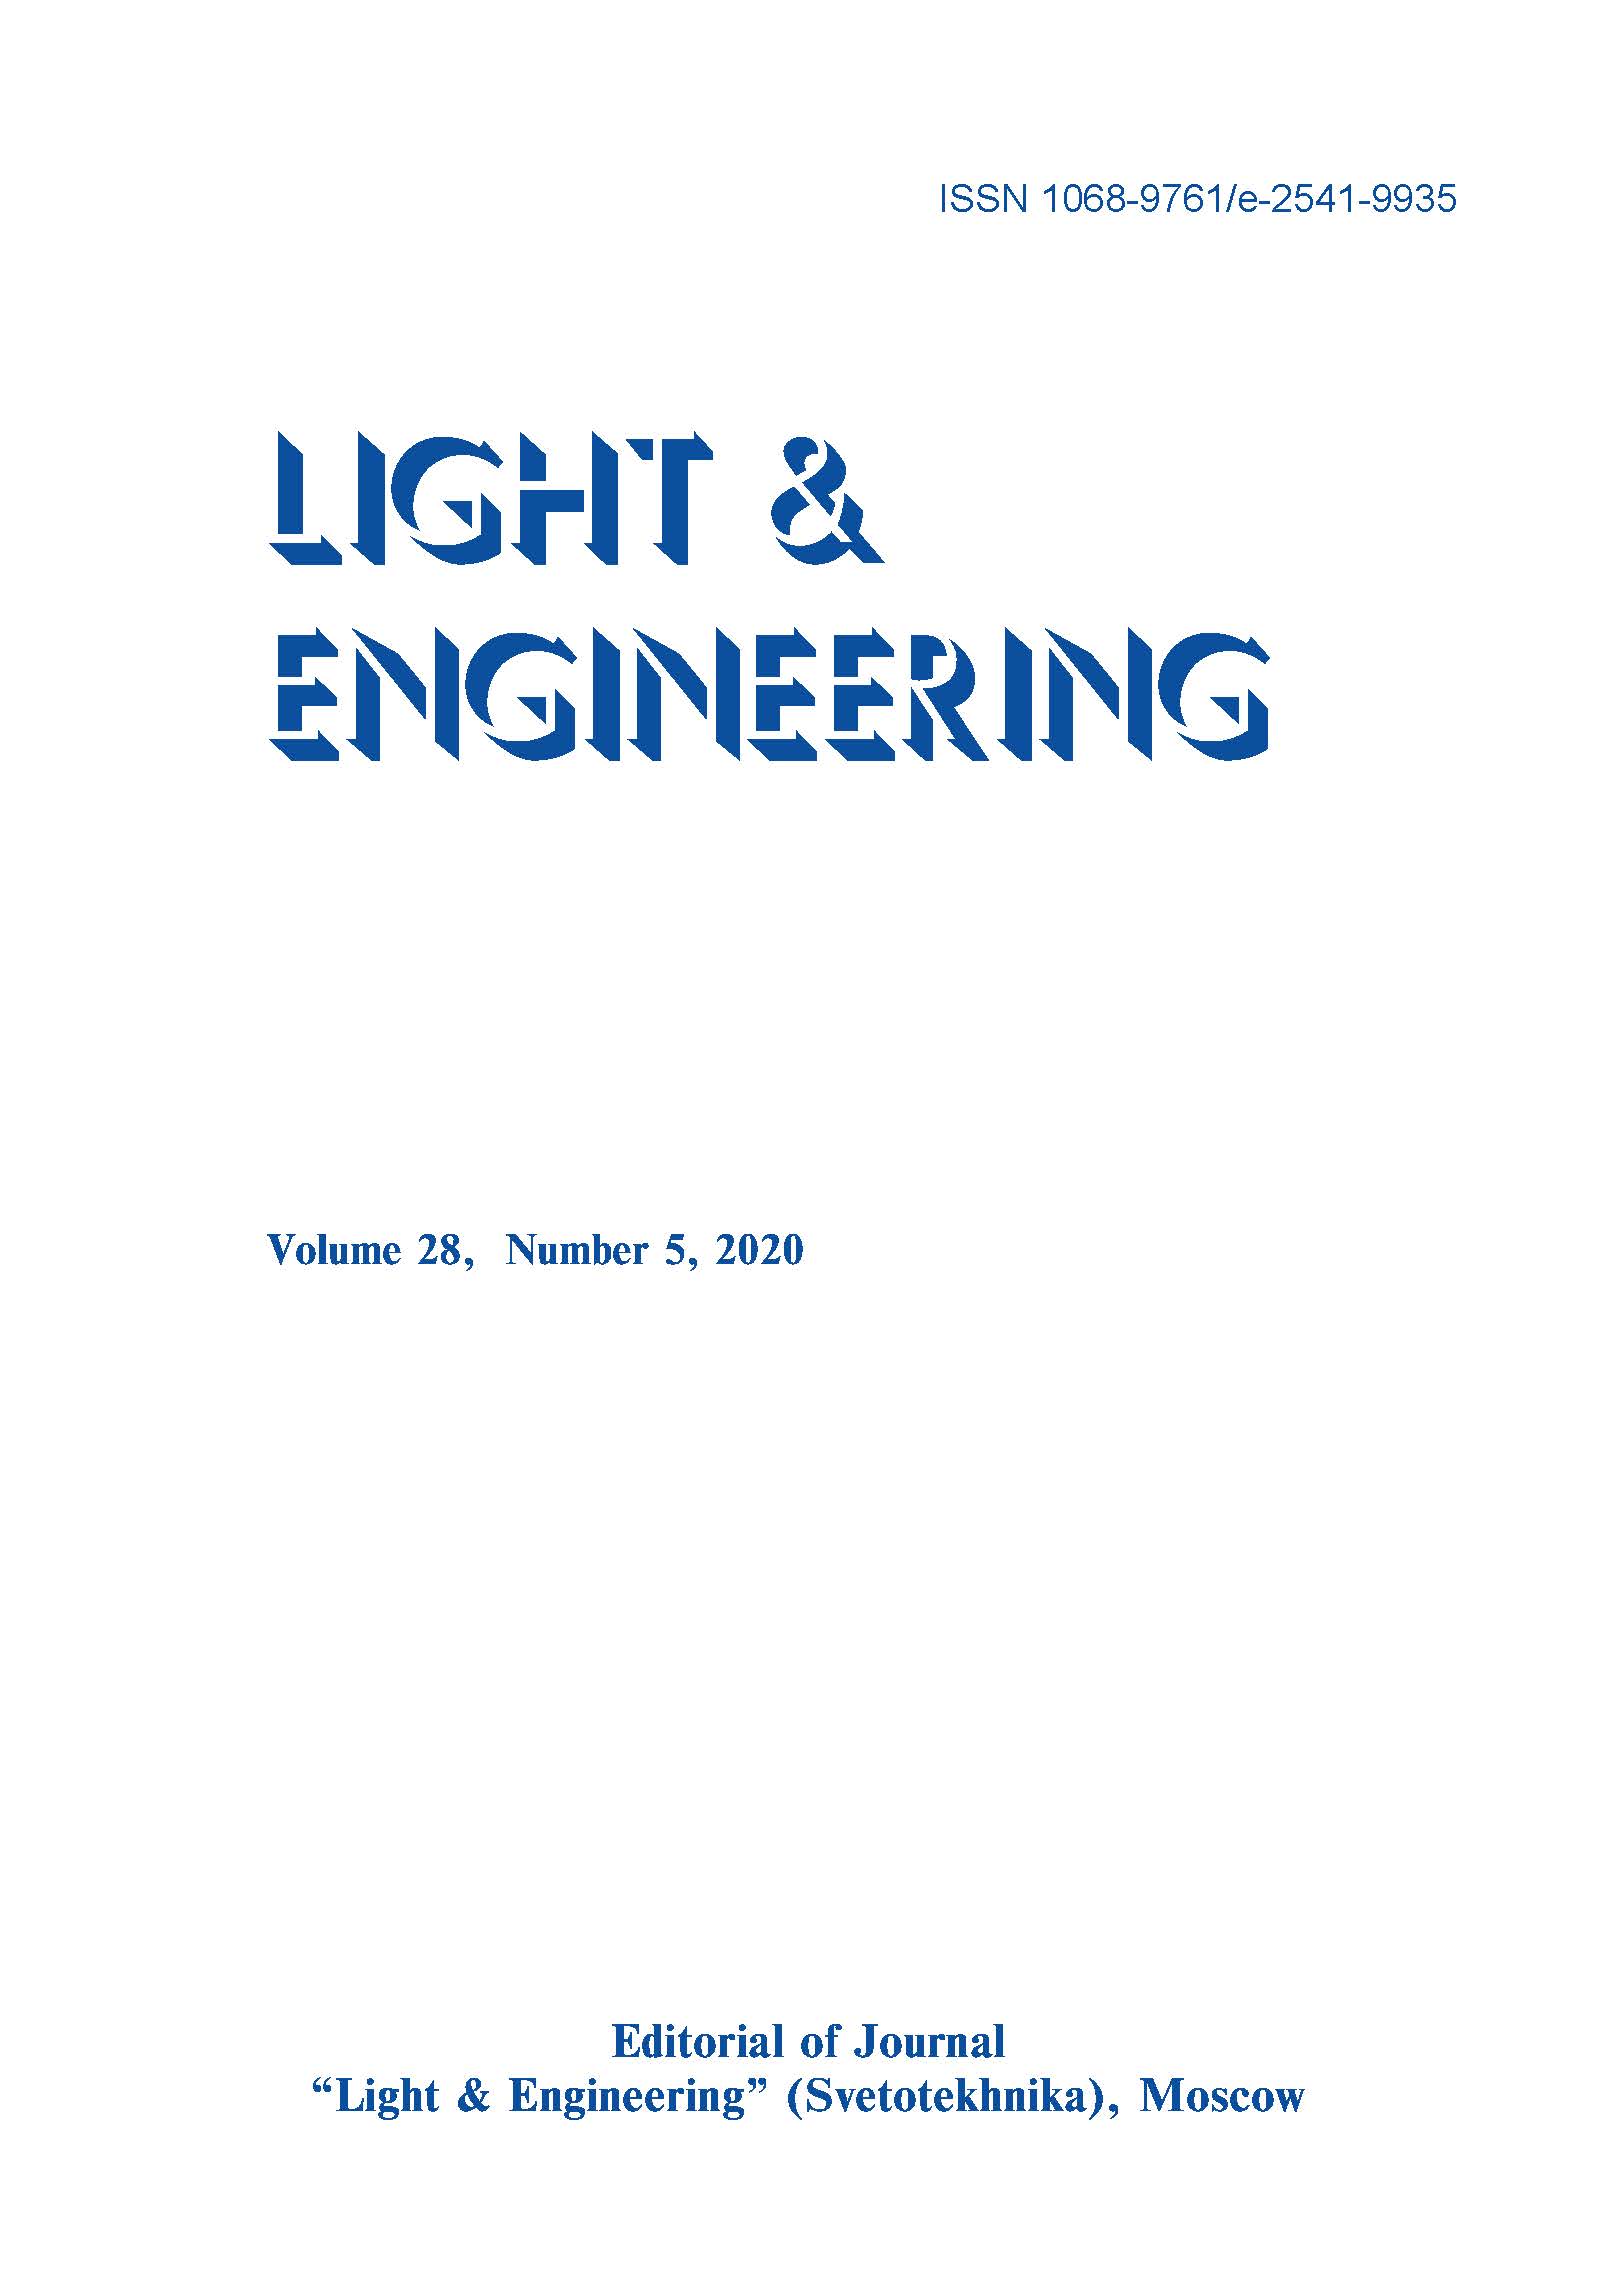 Fraunhofer Diffraction Description In The Approximation Of The Light Field Theory Light & Engineering Vol. 28, No. 5